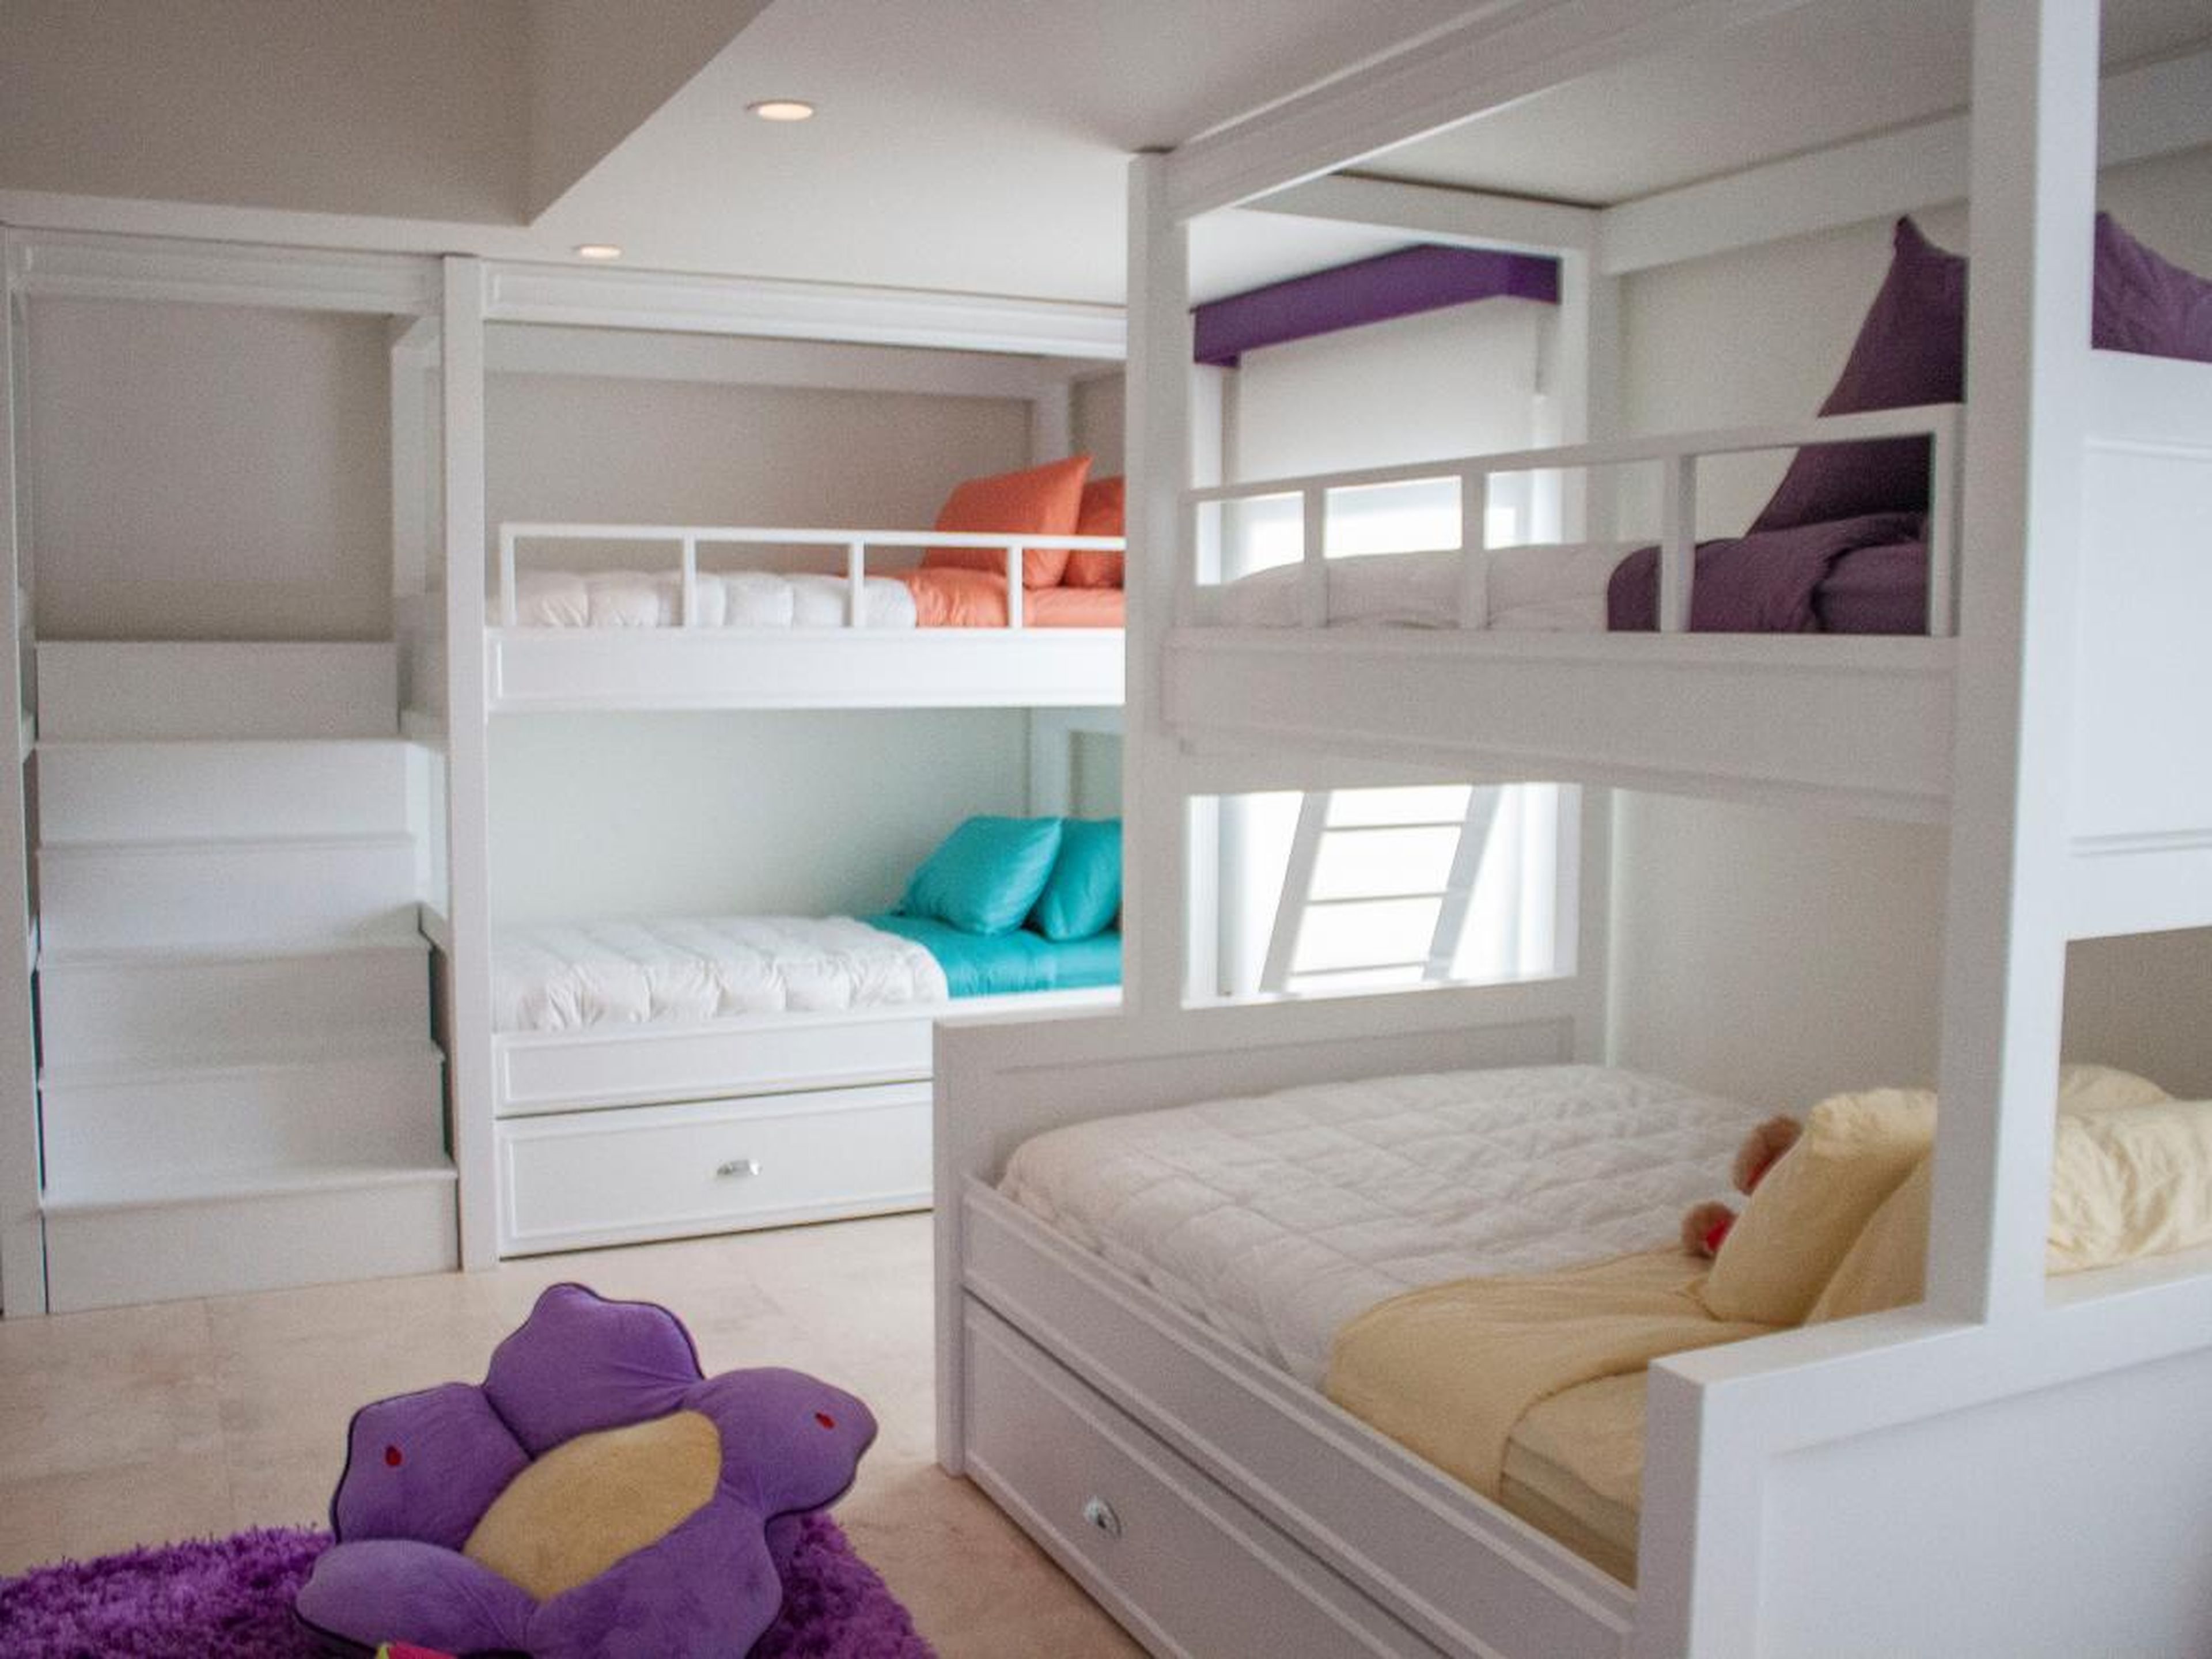 And a downstairs bedroom is arranged as a children's slumber-party room, with several bunk beds.